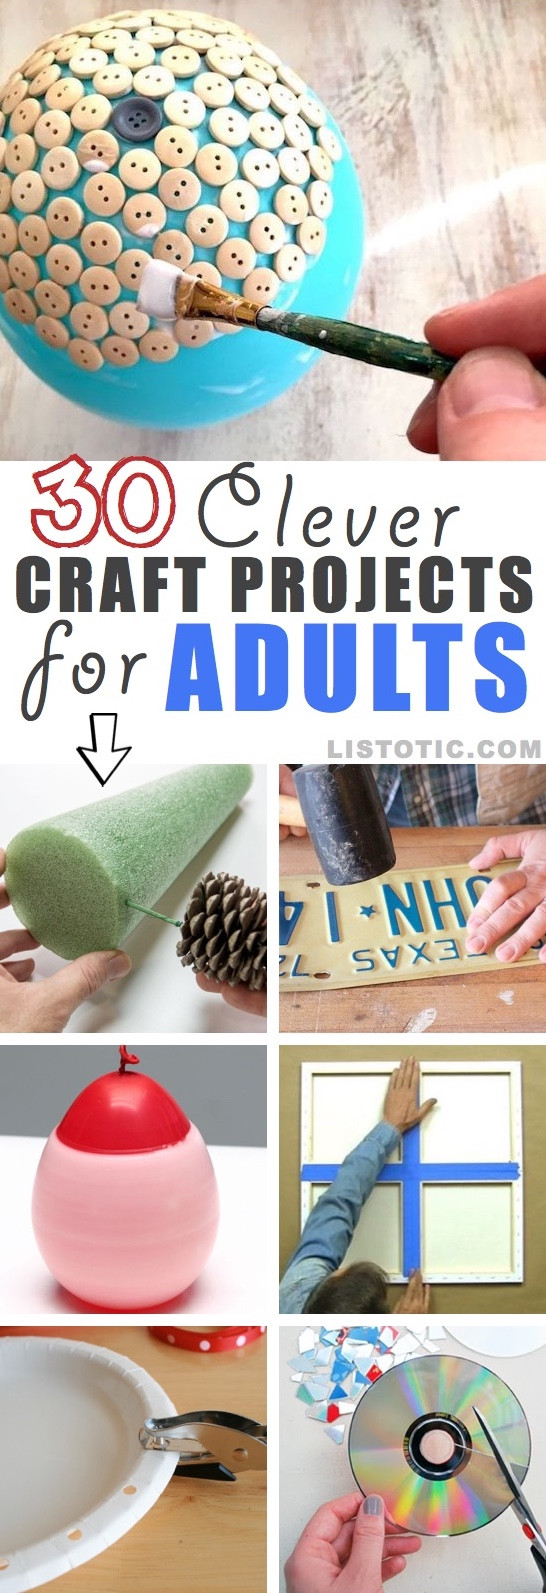 Christmas Craft Ideas For Adults To Sell
 Easy DIY Craft Ideas That Will Spark Your Creativity for